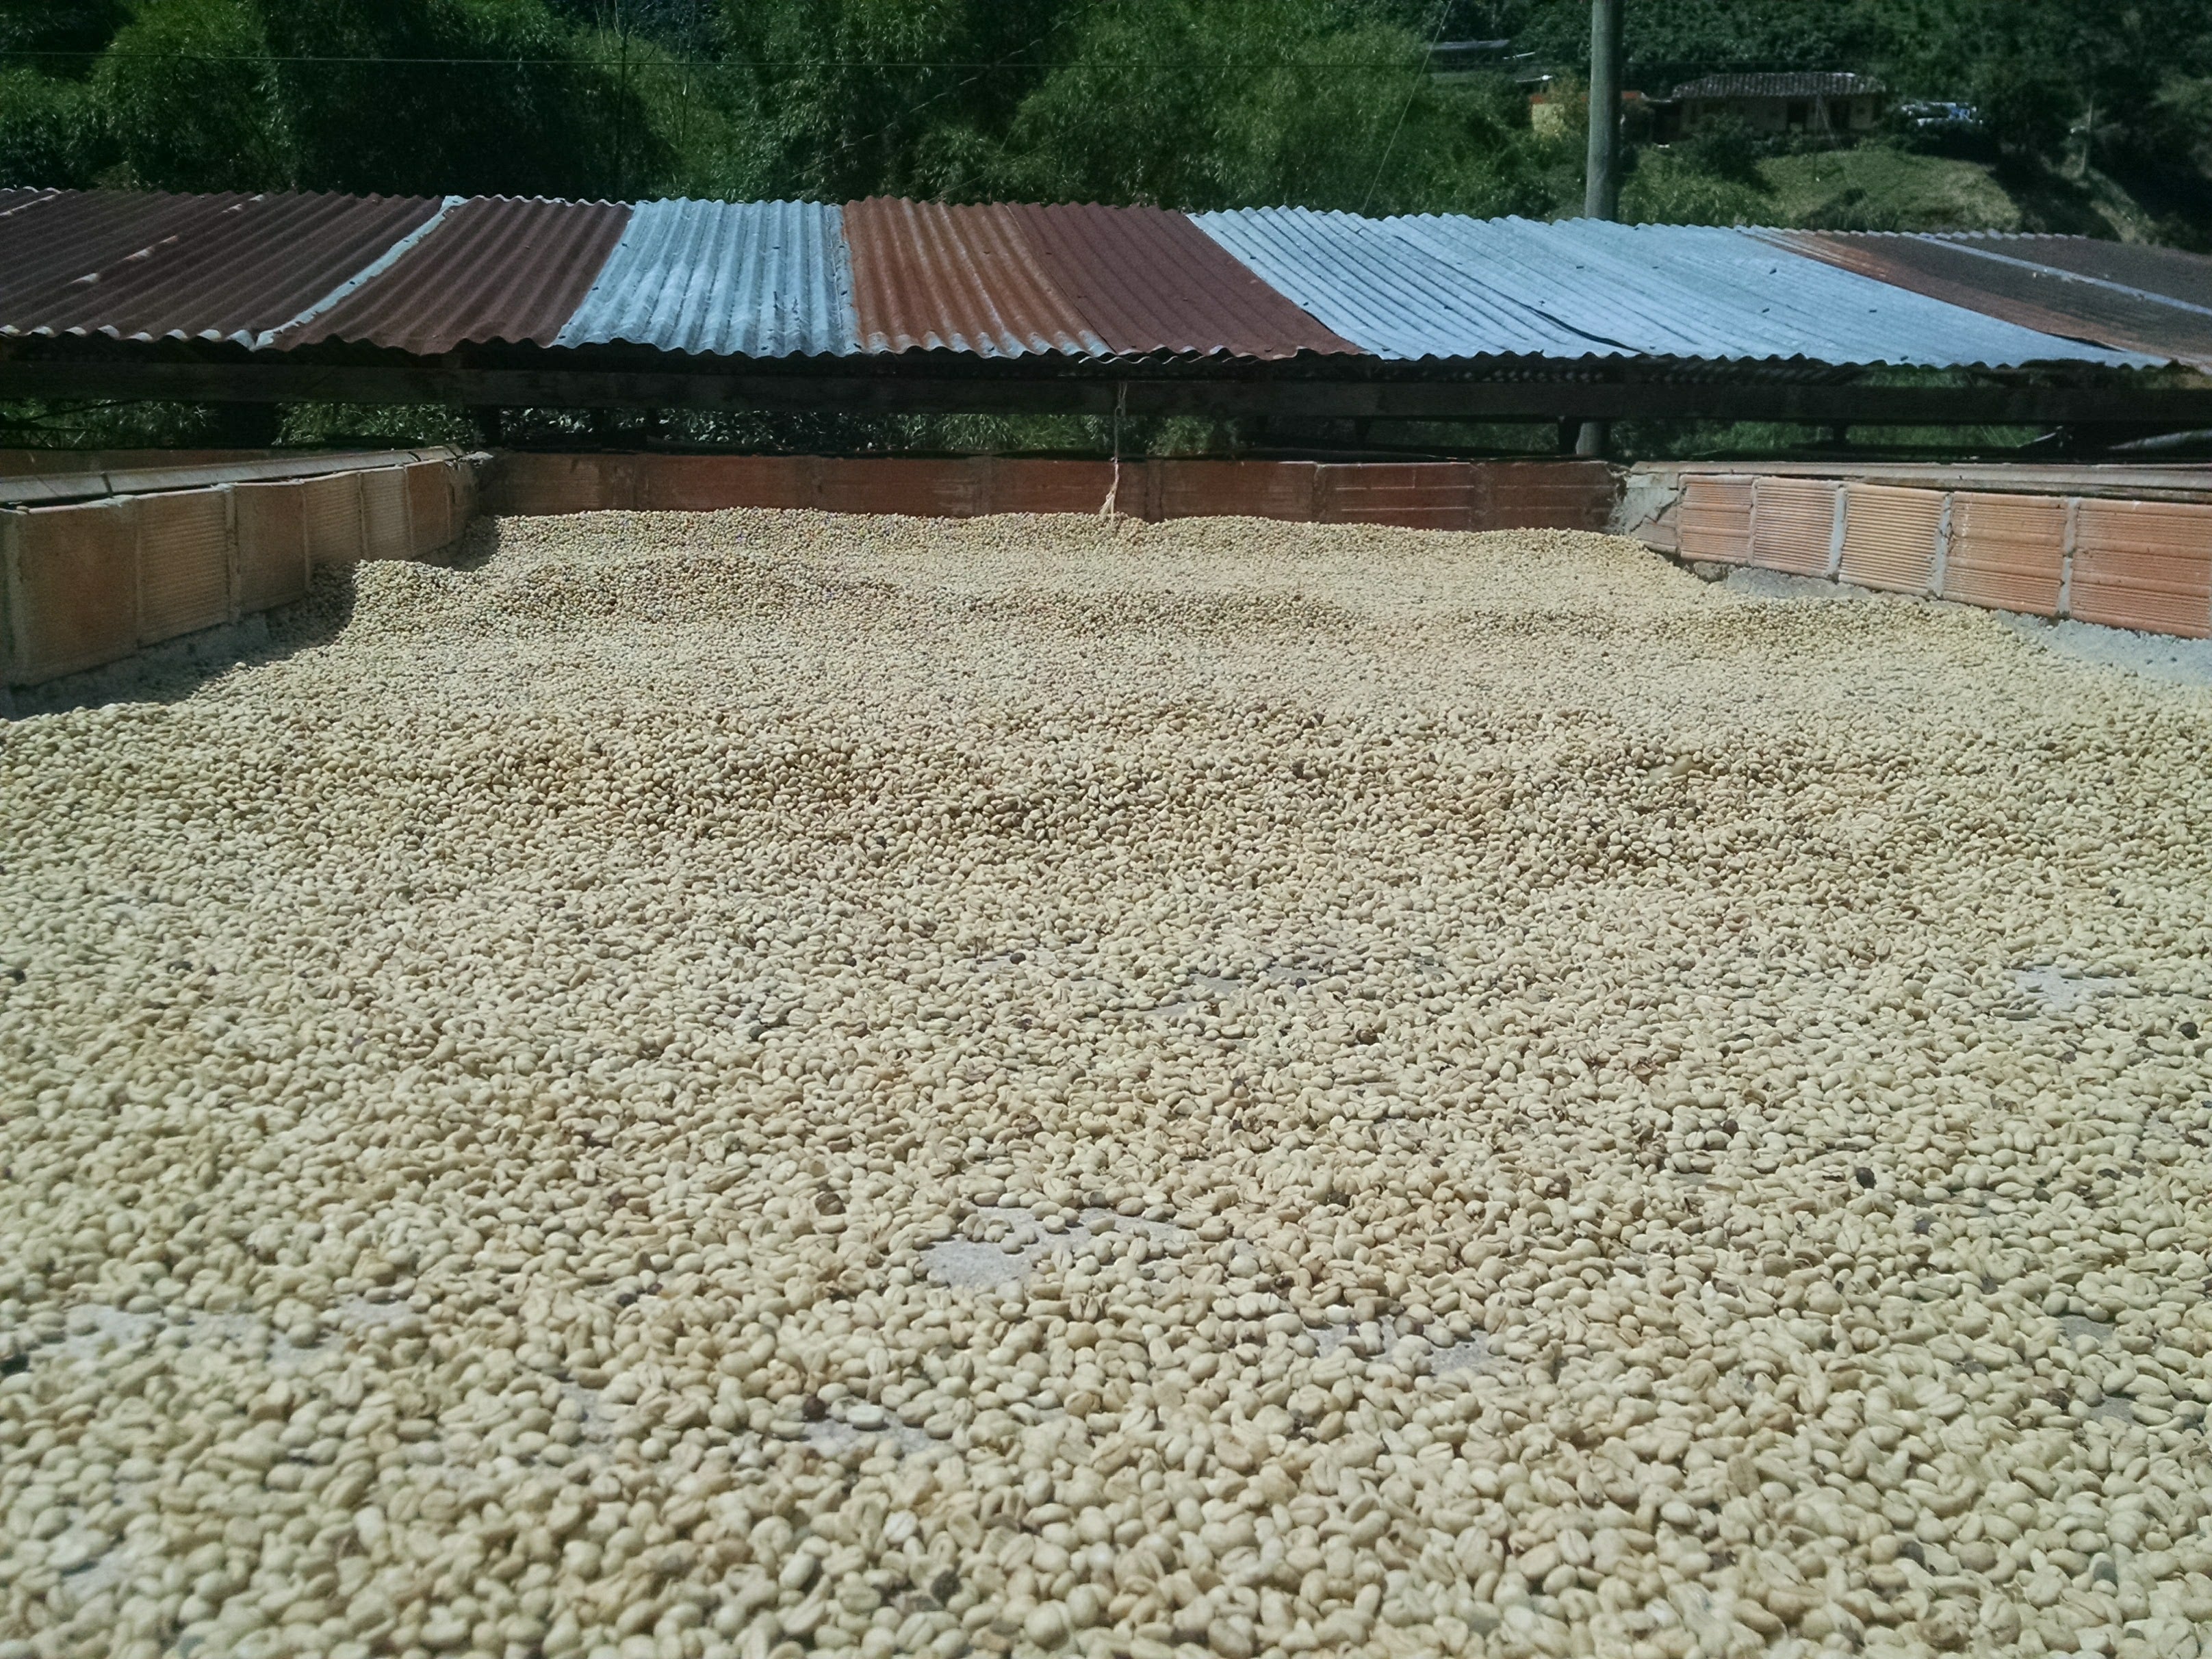 La Arboleda's sun drying space on roof, close up. Notice the thin layer and it has to be raked about every hour